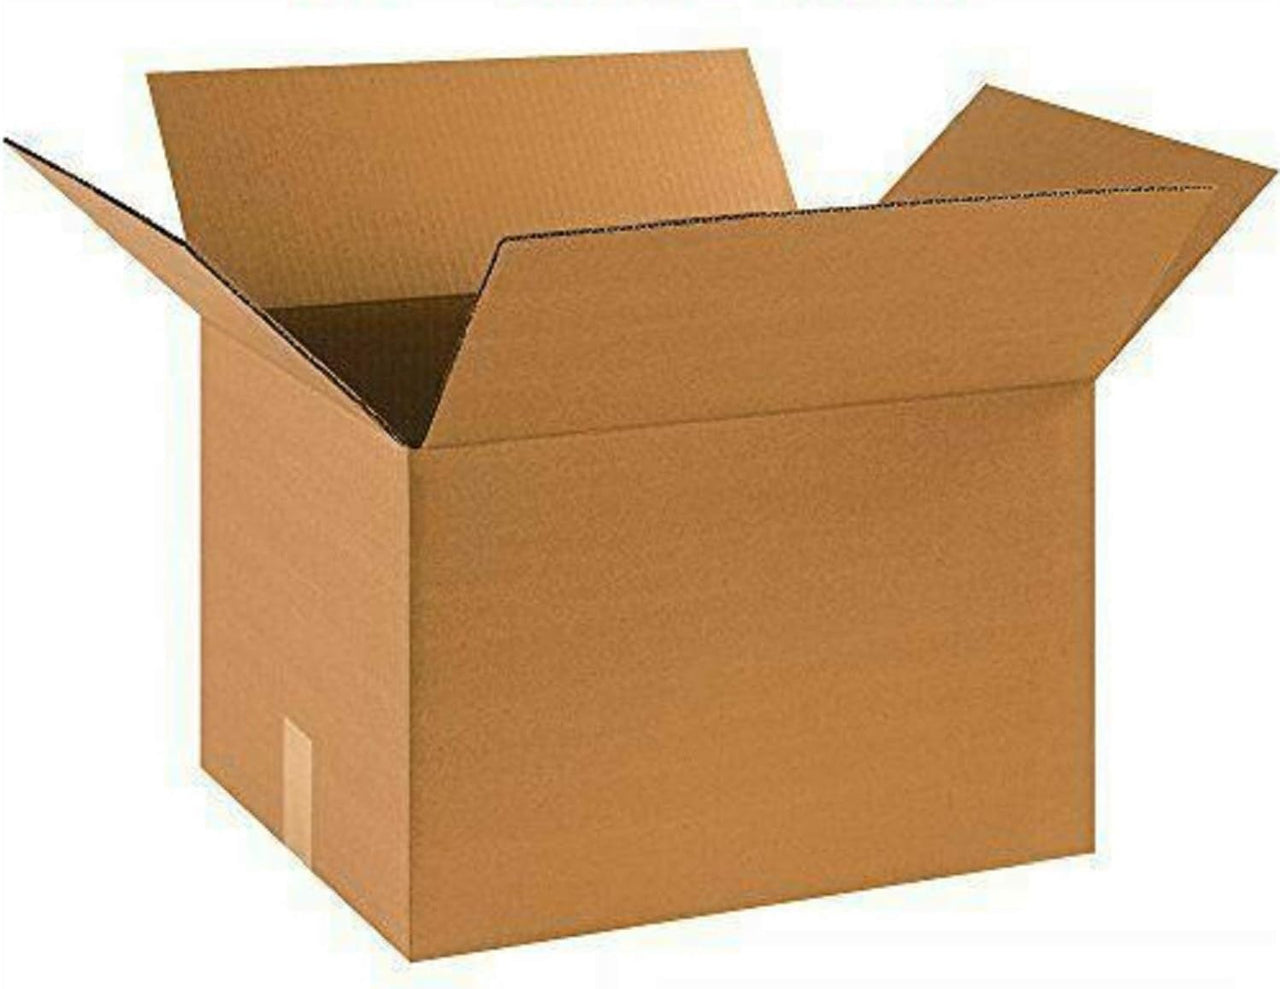 Shipping Boxes 18"L x 18"W x 18"H 10-Pack Corrugated Cardboard Box for Packing Moving Storage